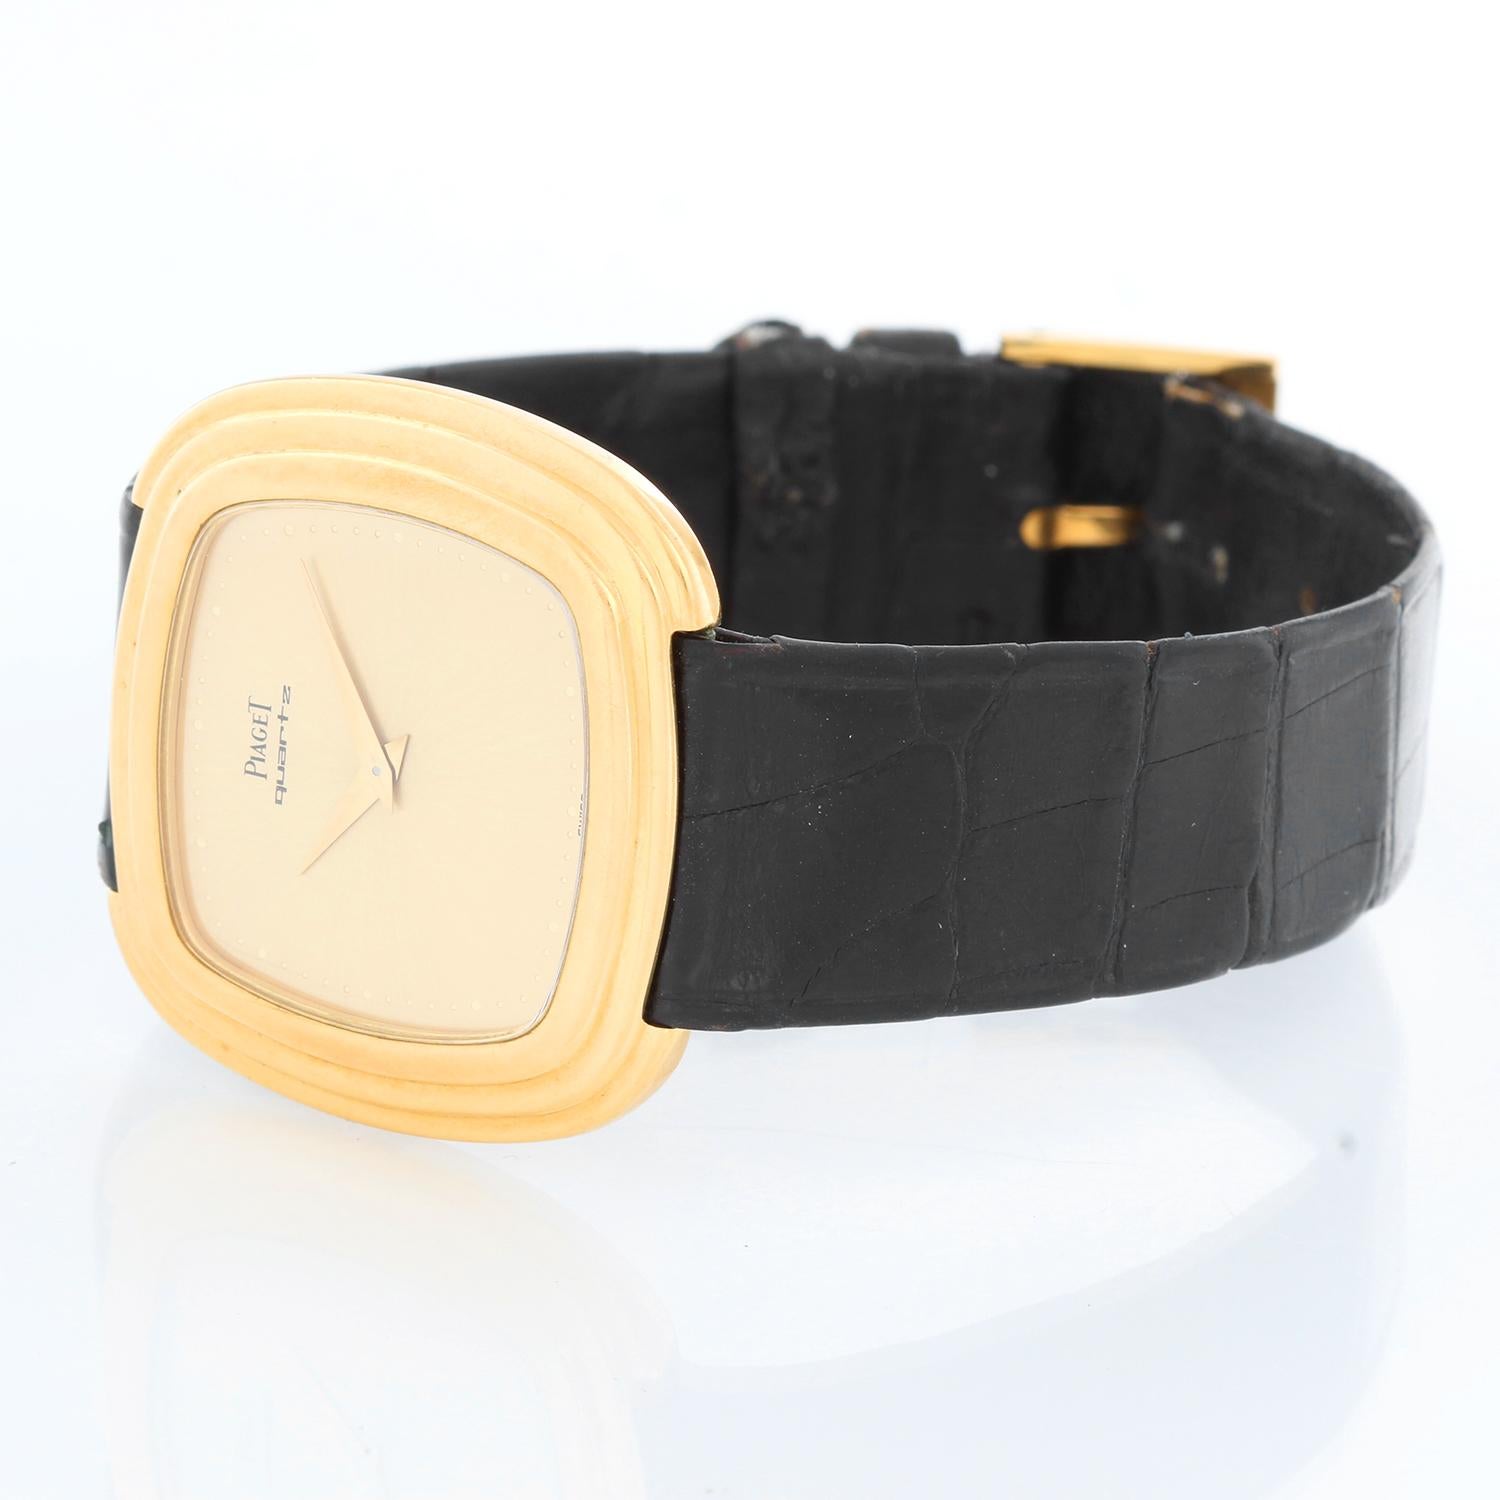 Piaget 18K Yellow Gold Men's Quartz Watch - Quartz. 18K Yellow gold ( 29 x 34 mm). Champagne dial. Black leather Piaget strap with Piaget tang buckle. Pre-owned with Piaget service case and papers. Dated 1985.